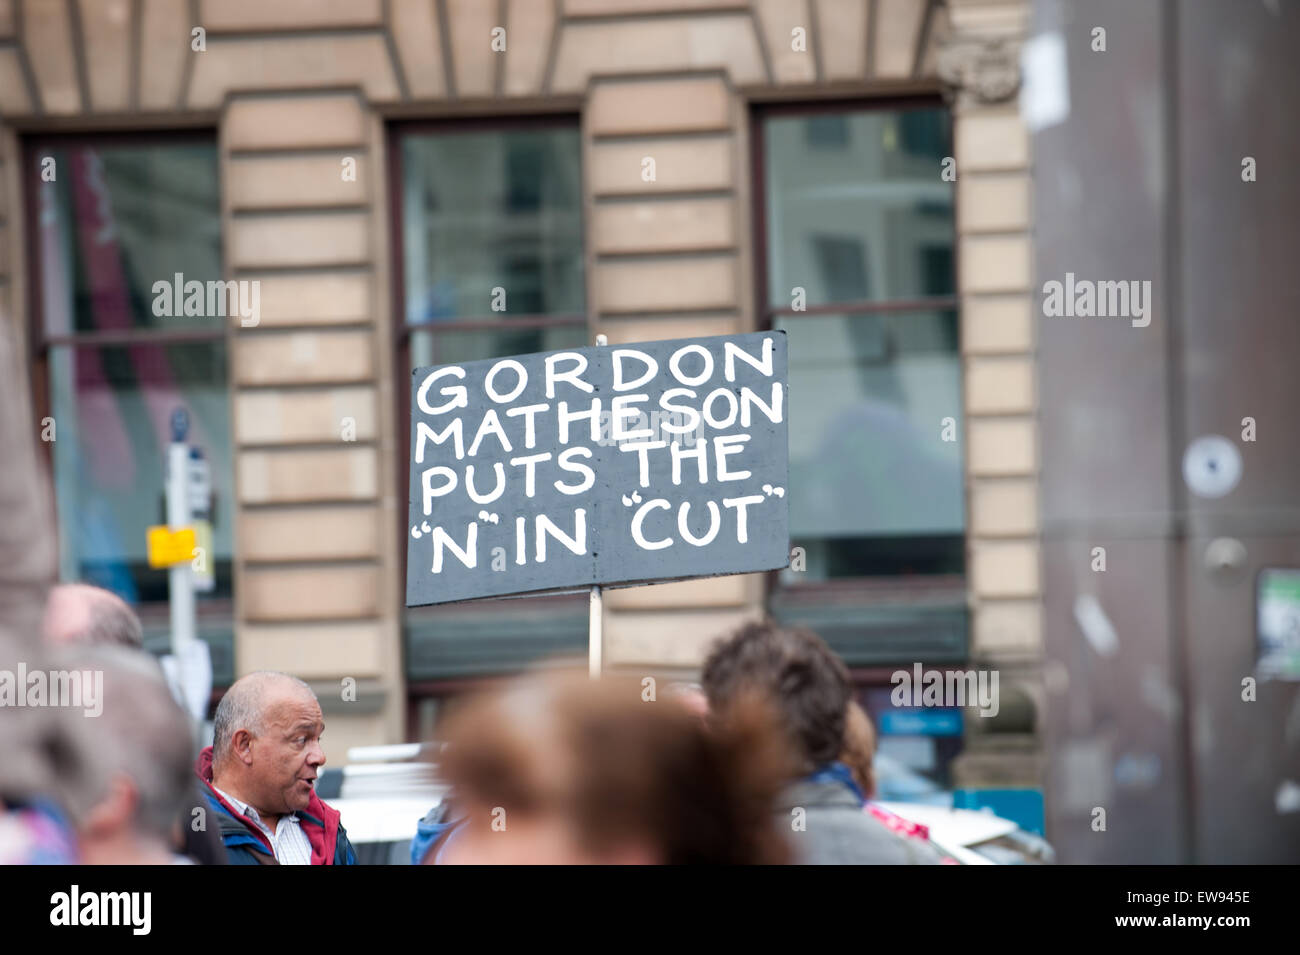 Glasgow, Scotland. 20th June, 2015. Anti-austerity demonstation held in Glasgow to coincide with The People's Assembly against austerity demo being held in London. Credit:  Tony Clerkson/Alamy Live News Stock Photo